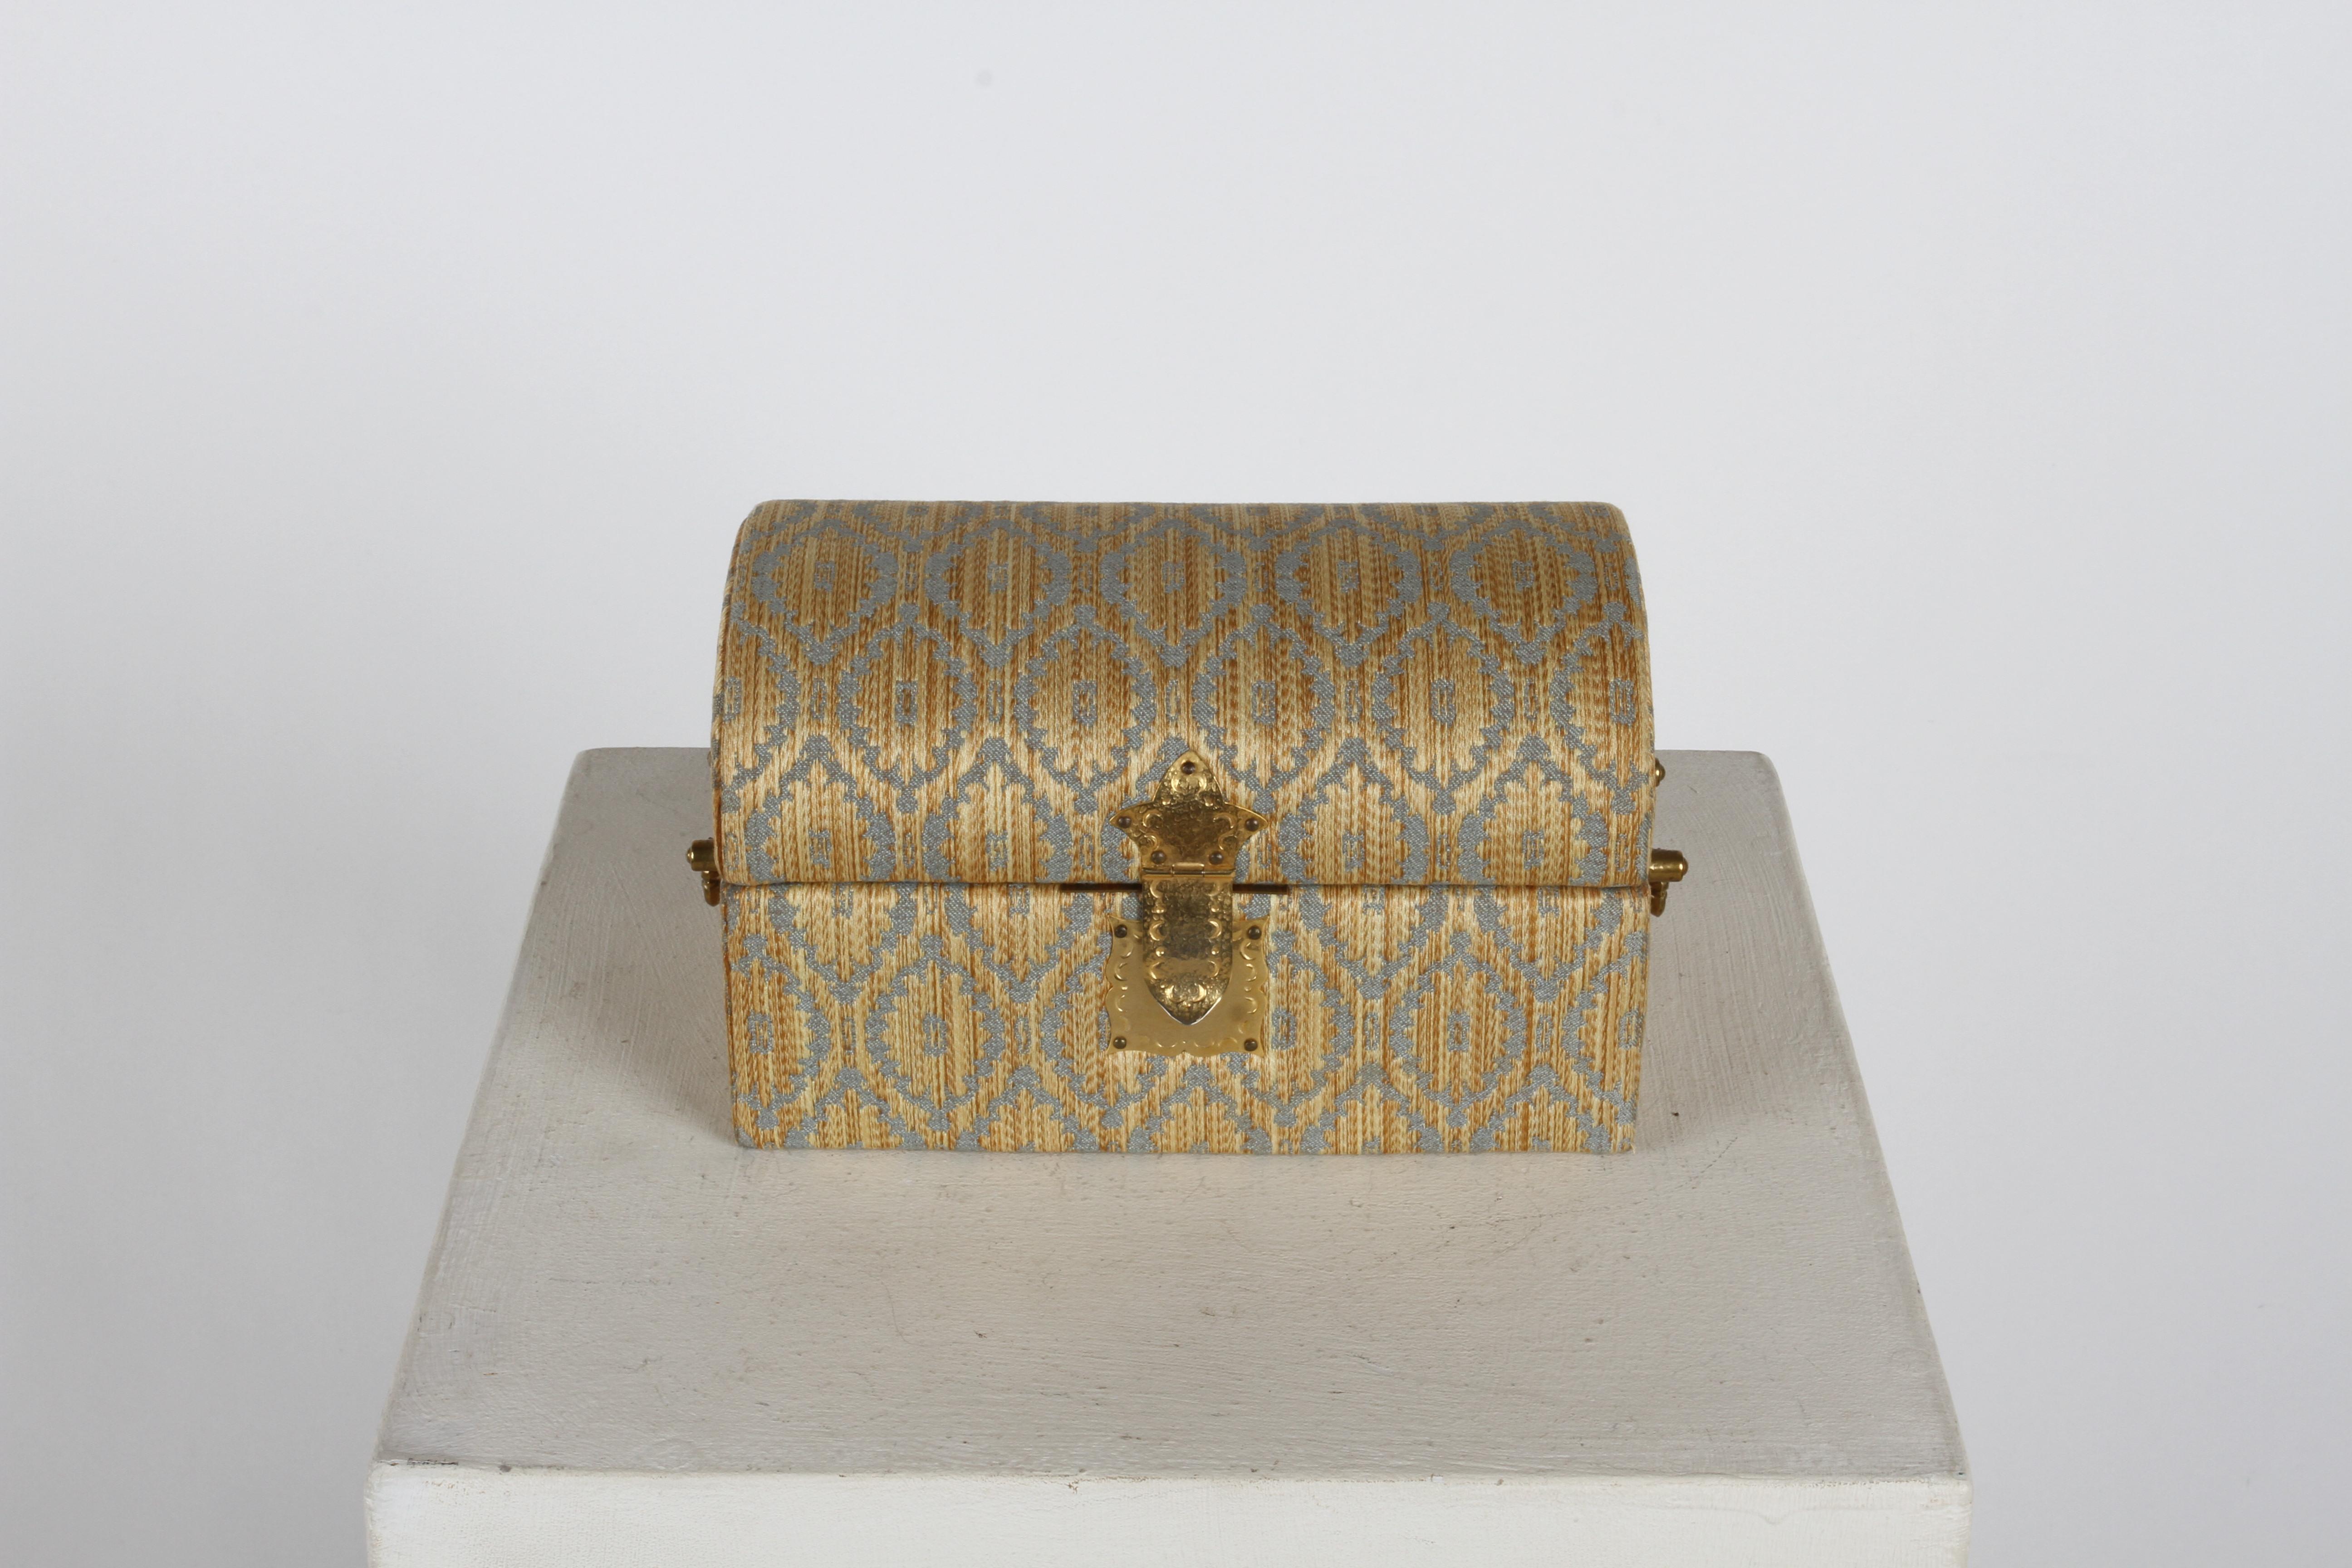 Glamorous Hollywood Regency vintage casket form jewelry box or treasure chest retailed by Neiman-Marcus, covered in Italian made Jacquard velvet with silver thread with carrying handles and locking clasp. The luxurious interior is lined with a blue